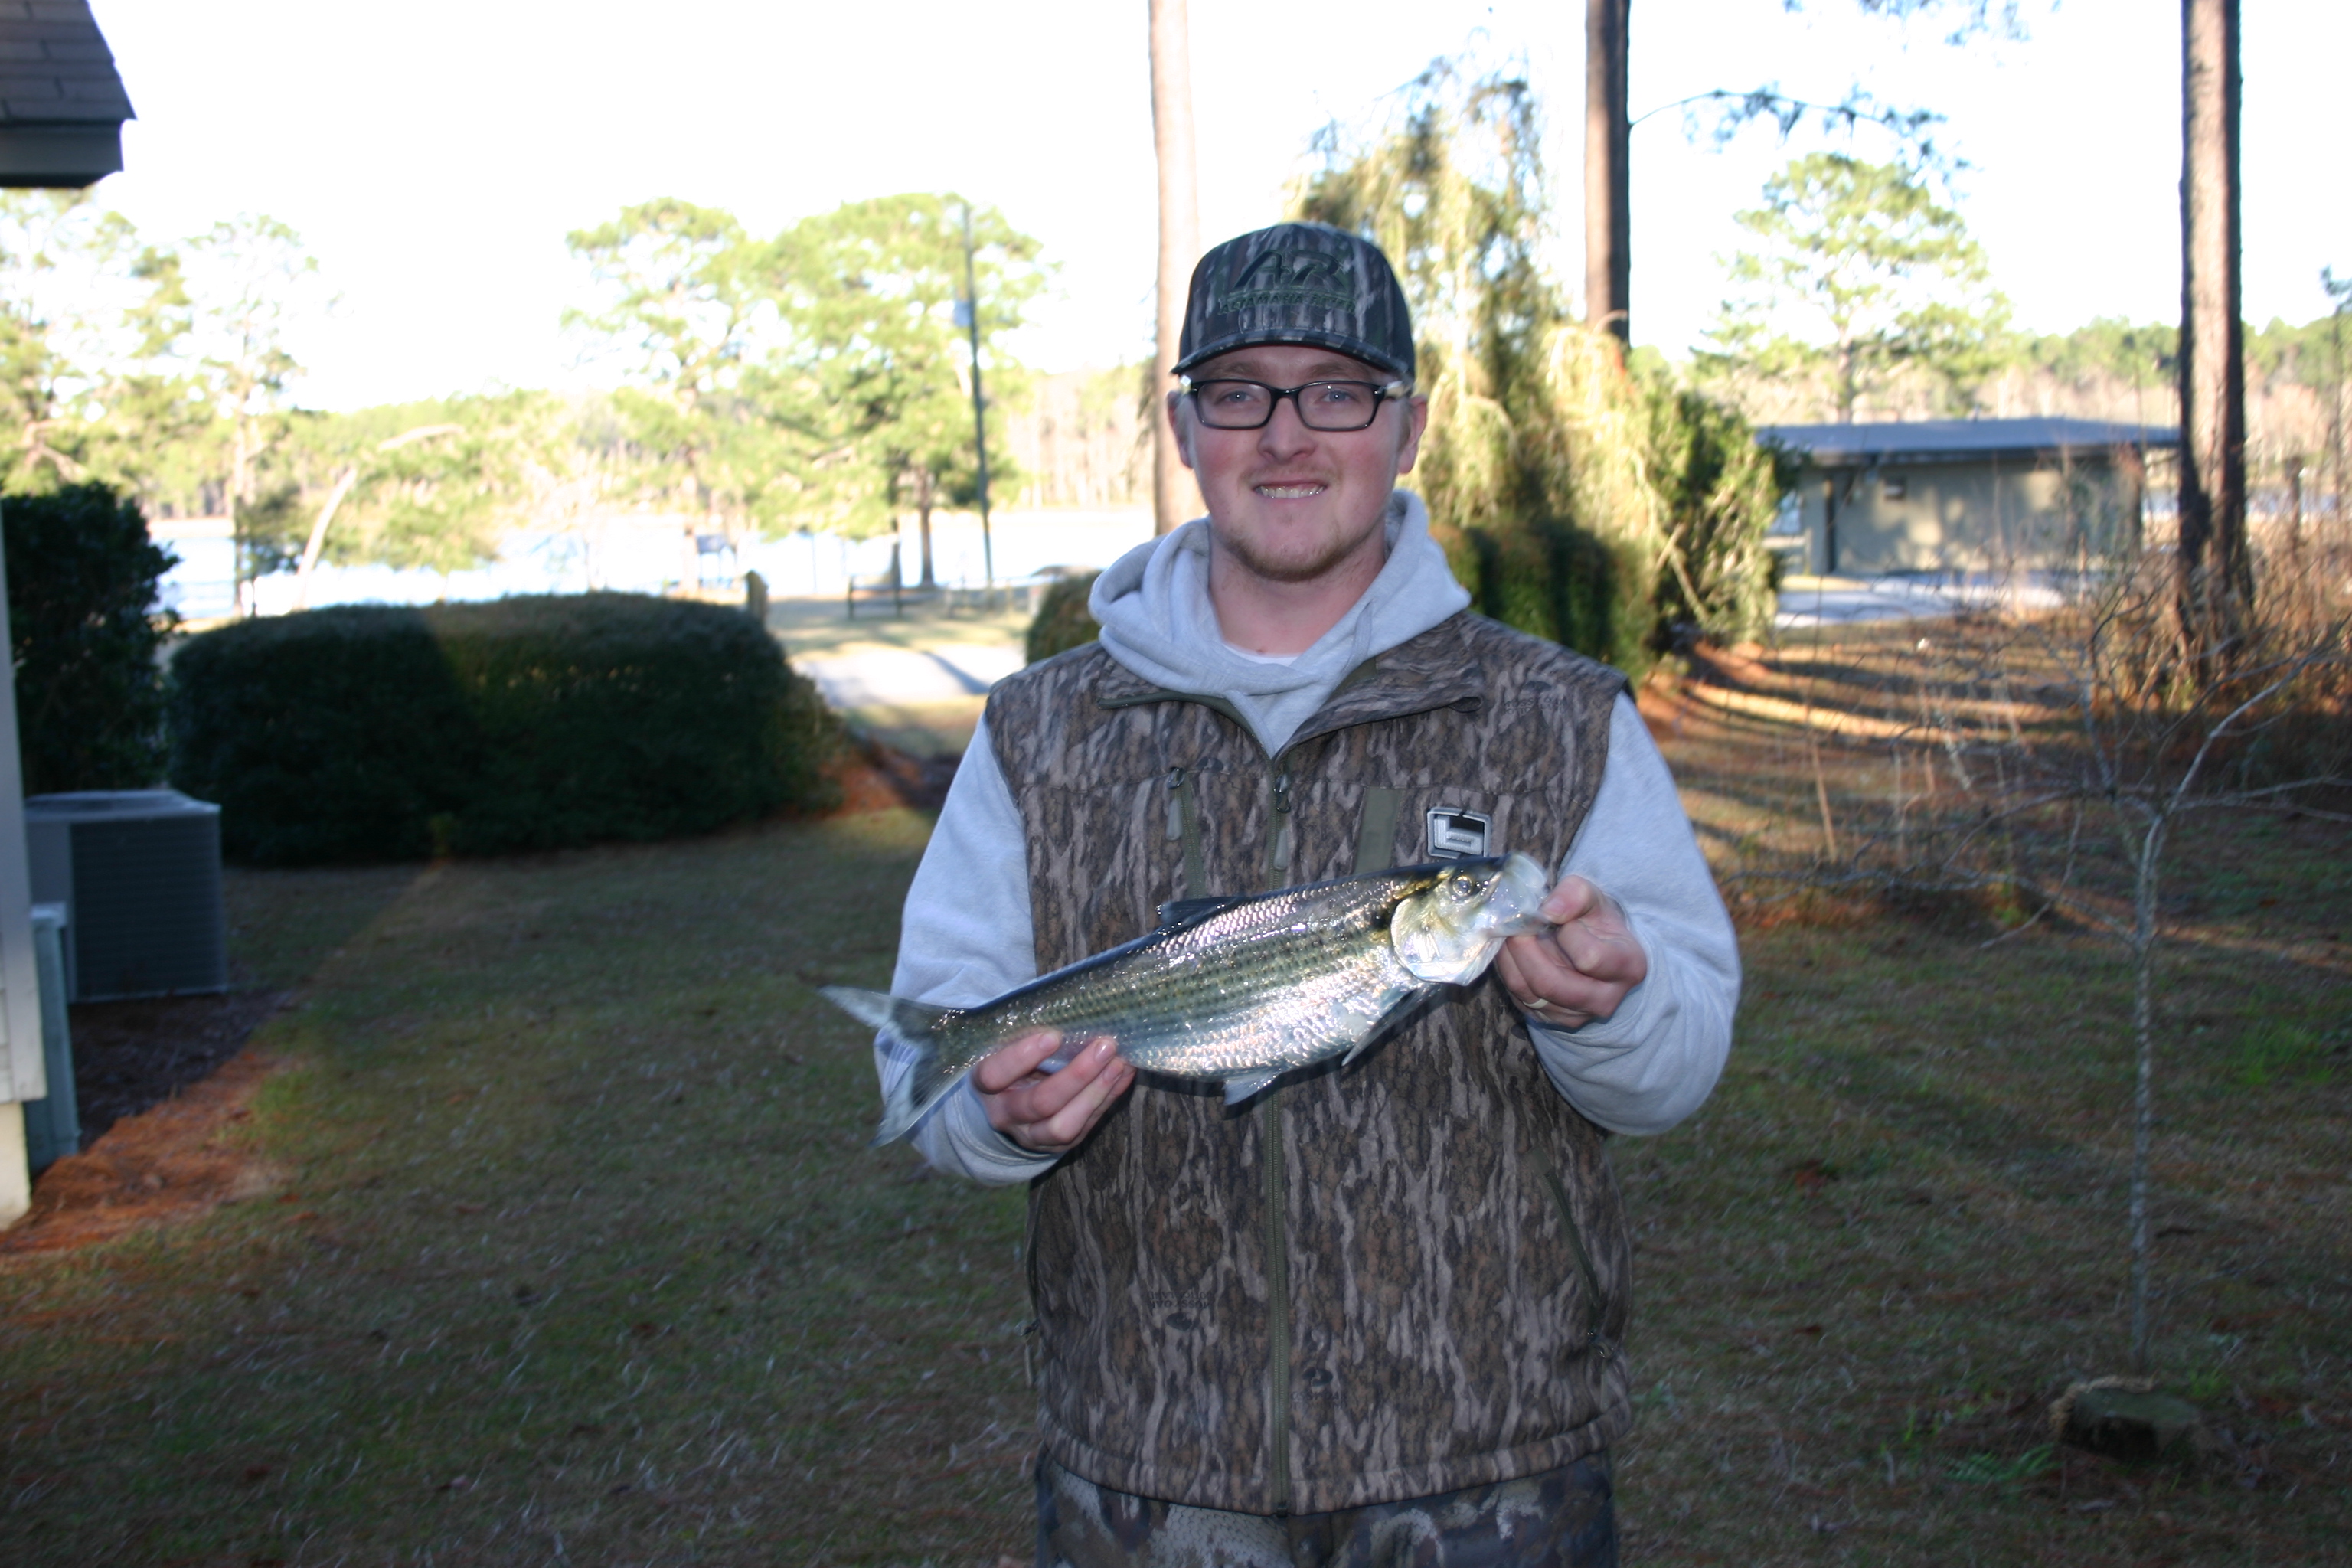 State Record Hickory Shad Caught by Christopher Jones on February 7, 2021 from the Ogeechee River